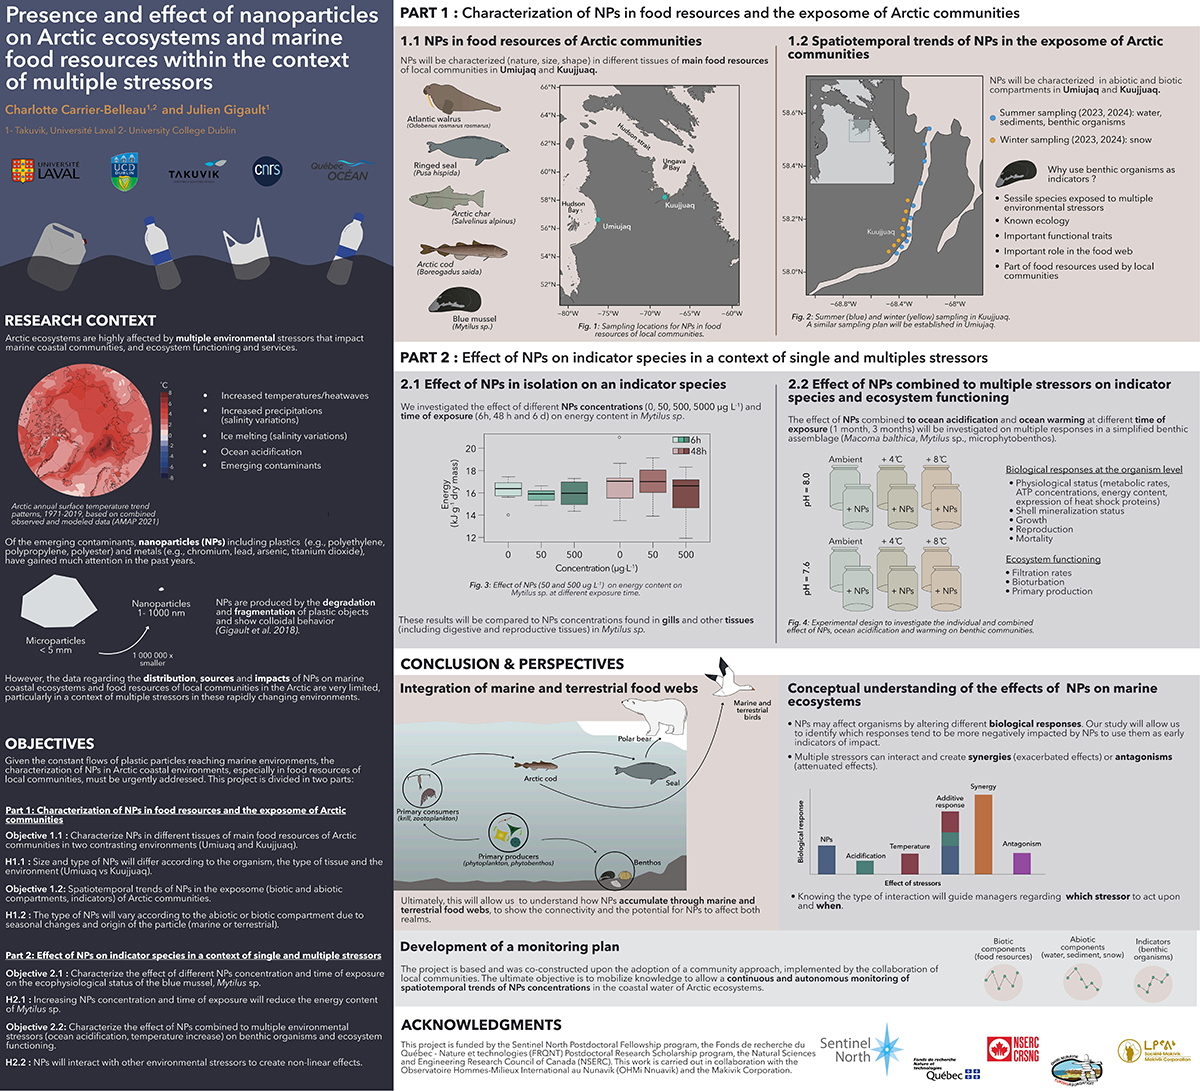 sentinelle nord Charlotte Carrier-Belleau - Presence and effect of nanoparticles on Arctic marine food resources in a context of multiple stressors gas sampling